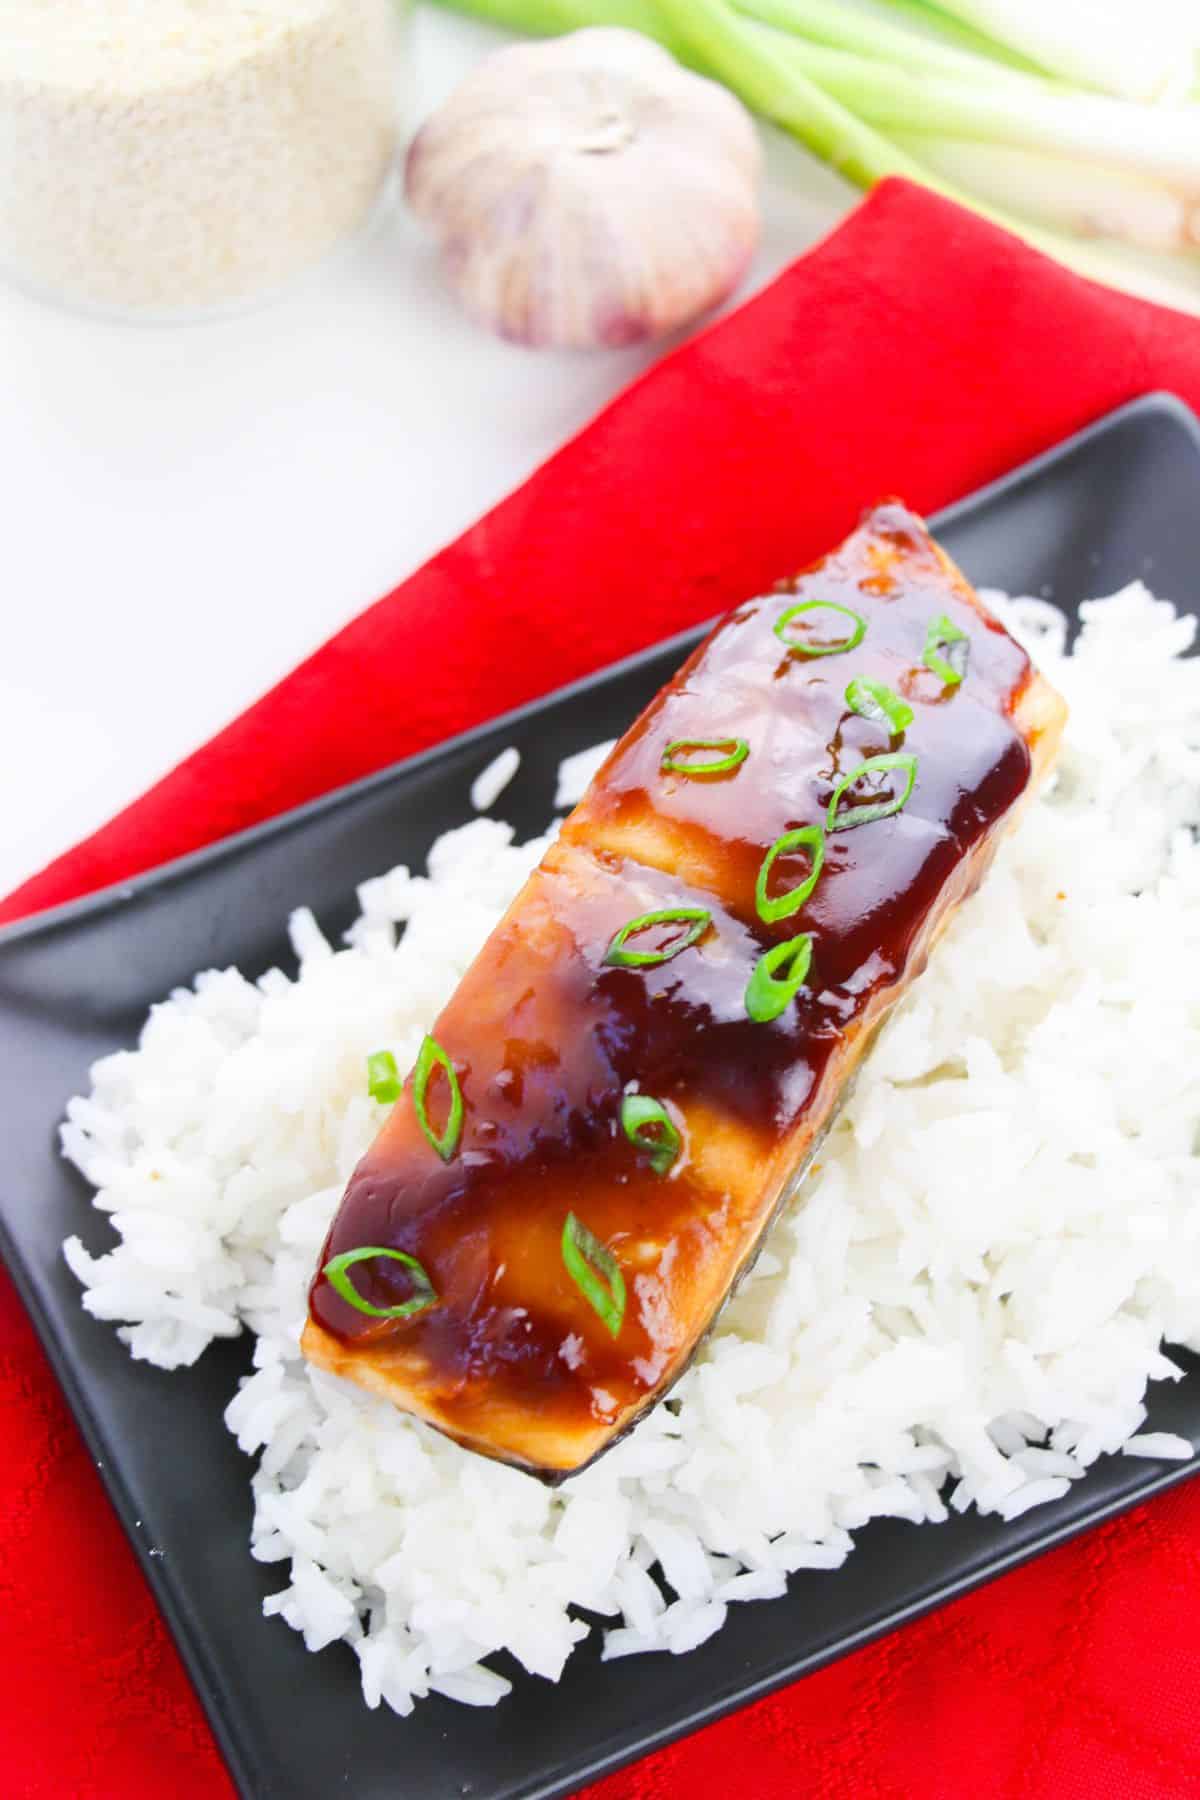 Baked Teriyaki Glazed Salmon on a serving plate garnished with sliced green onions.